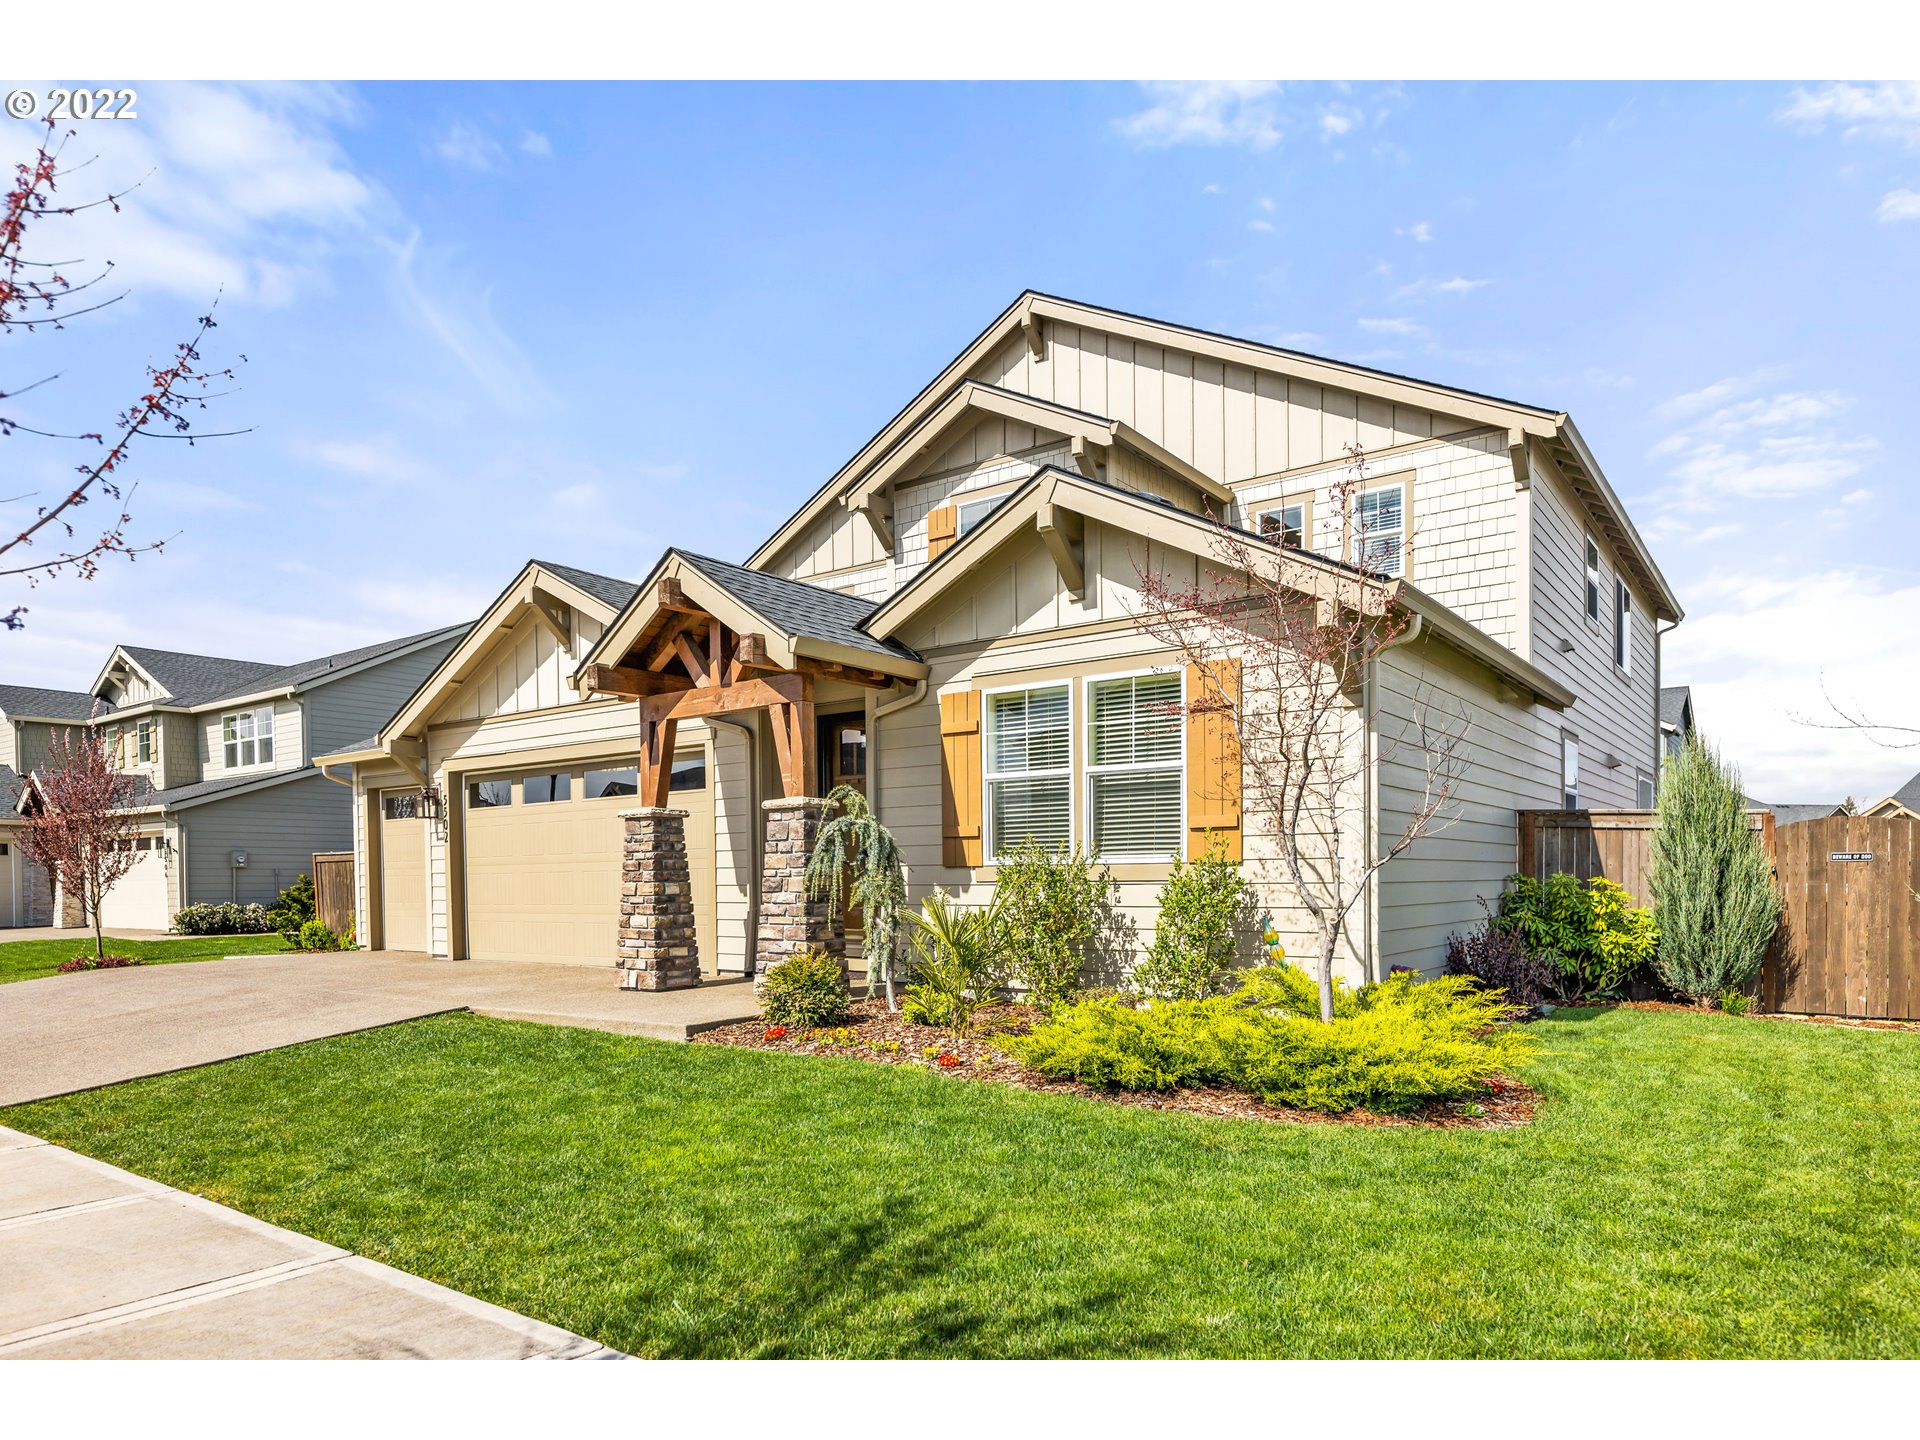 5502 NW 140TH ST, Vancouver, WA 98685